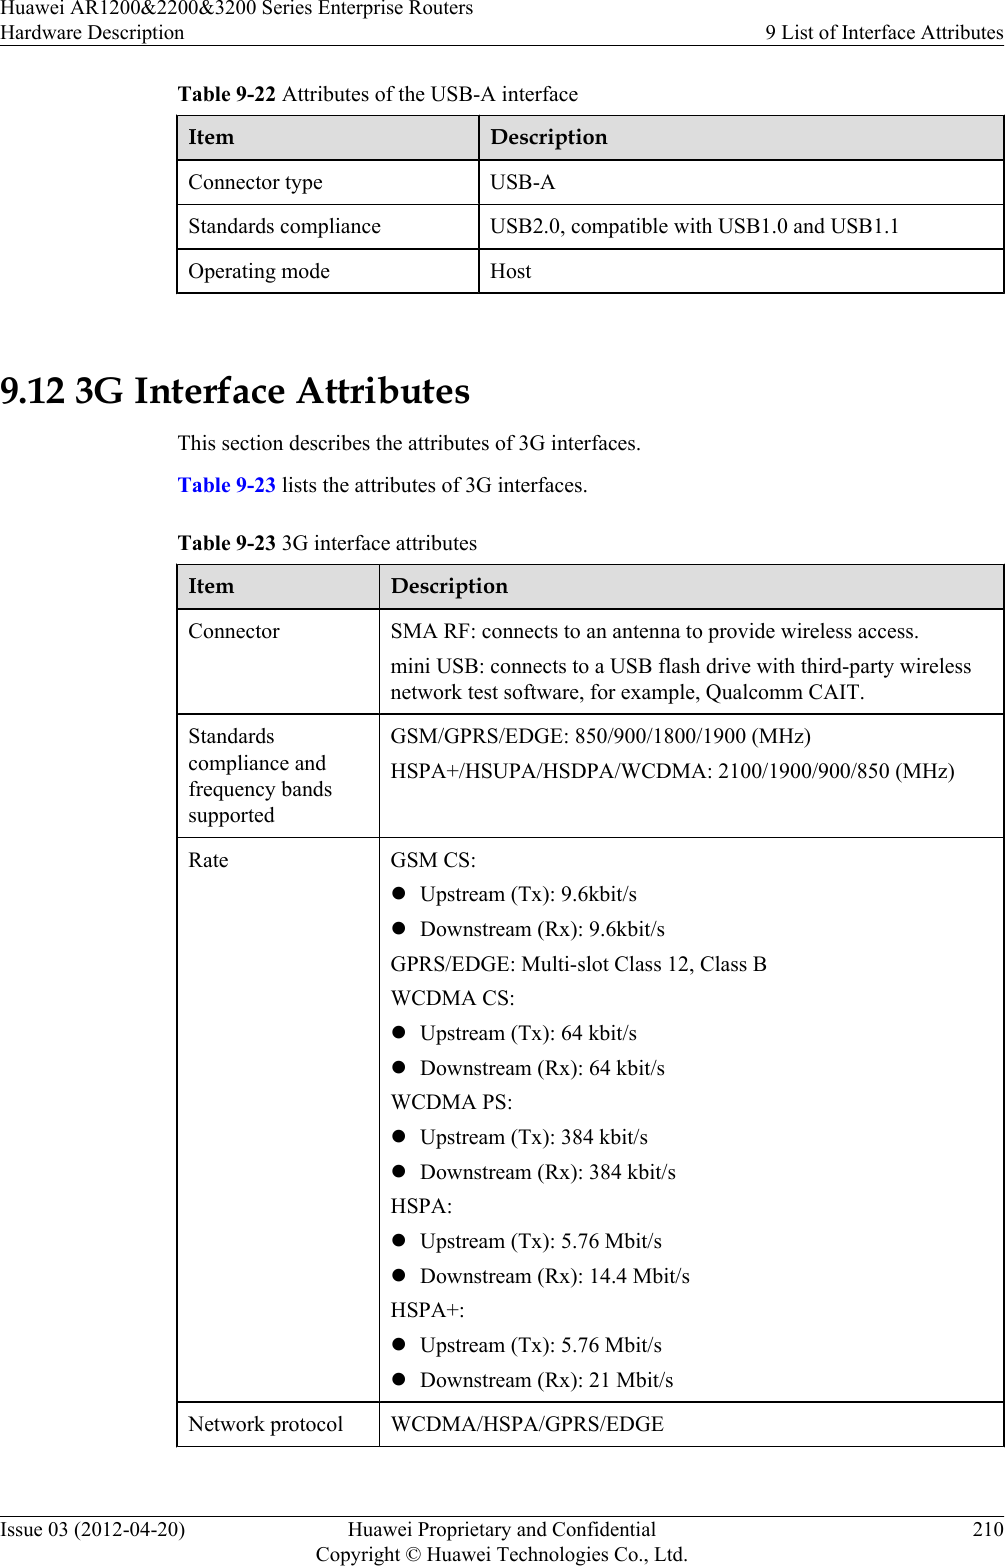 Table 9-22 Attributes of the USB-A interfaceItem DescriptionConnector type USB-AStandards compliance USB2.0, compatible with USB1.0 and USB1.1Operating mode Host 9.12 3G Interface AttributesThis section describes the attributes of 3G interfaces.Table 9-23 lists the attributes of 3G interfaces.Table 9-23 3G interface attributesItem DescriptionConnector SMA RF: connects to an antenna to provide wireless access.mini USB: connects to a USB flash drive with third-party wirelessnetwork test software, for example, Qualcomm CAIT.Standardscompliance andfrequency bandssupportedGSM/GPRS/EDGE: 850/900/1800/1900 (MHz)HSPA+/HSUPA/HSDPA/WCDMA: 2100/1900/900/850 (MHz)Rate GSM CS:lUpstream (Tx): 9.6kbit/slDownstream (Rx): 9.6kbit/sGPRS/EDGE: Multi-slot Class 12, Class BWCDMA CS:lUpstream (Tx): 64 kbit/slDownstream (Rx): 64 kbit/sWCDMA PS:lUpstream (Tx): 384 kbit/slDownstream (Rx): 384 kbit/sHSPA:lUpstream (Tx): 5.76 Mbit/slDownstream (Rx): 14.4 Mbit/sHSPA+:lUpstream (Tx): 5.76 Mbit/slDownstream (Rx): 21 Mbit/sNetwork protocol WCDMA/HSPA/GPRS/EDGE Huawei AR1200&amp;2200&amp;3200 Series Enterprise RoutersHardware Description 9 List of Interface AttributesIssue 03 (2012-04-20) Huawei Proprietary and ConfidentialCopyright © Huawei Technologies Co., Ltd.210